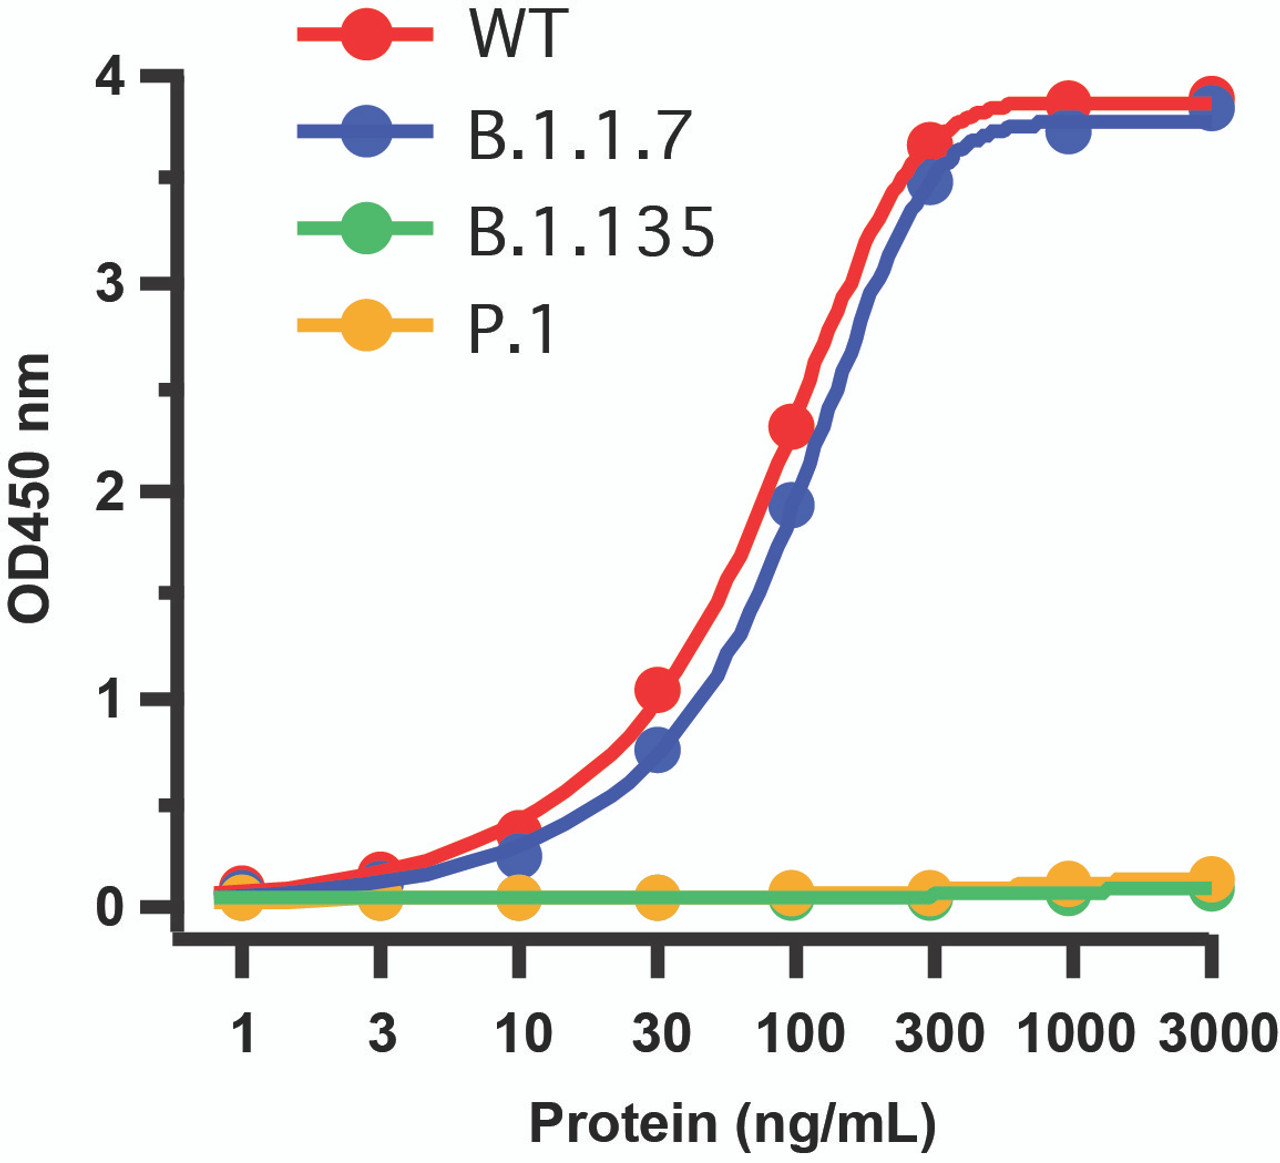 <strong> Figure 1 Detection of SARS-CoV-2 Variant Proteins with Spike S1 Antibodies by Direct ELISA</strong> 
Coating Antigen: SARS-CoV-2 full length spike proteins, including WT, UK variant (B.1.1.7) , SA variant (B.1.135) and Brazil (P.1) . Dilution: 1-3000 ng/mL. Incubate at 4 &#730; C overnight.
Detection Antibodies: SARS-CoV-2 Spike S1 Antibody, 10-351, 0.1 &#956;g/mL, incubate at RT for 1 hr.
Secondary Antibodies: Goat anti-rabbit HRP at 1:20, 000, incubate at RT for 1 hr.
<strong>Spike S1 antibody (10-351) cannot detect SA variant (B.1.135) and Brazil (P.1) , both of which carry more mutations in RBD as compared to UK variant (B.1.1.7) . </strong>